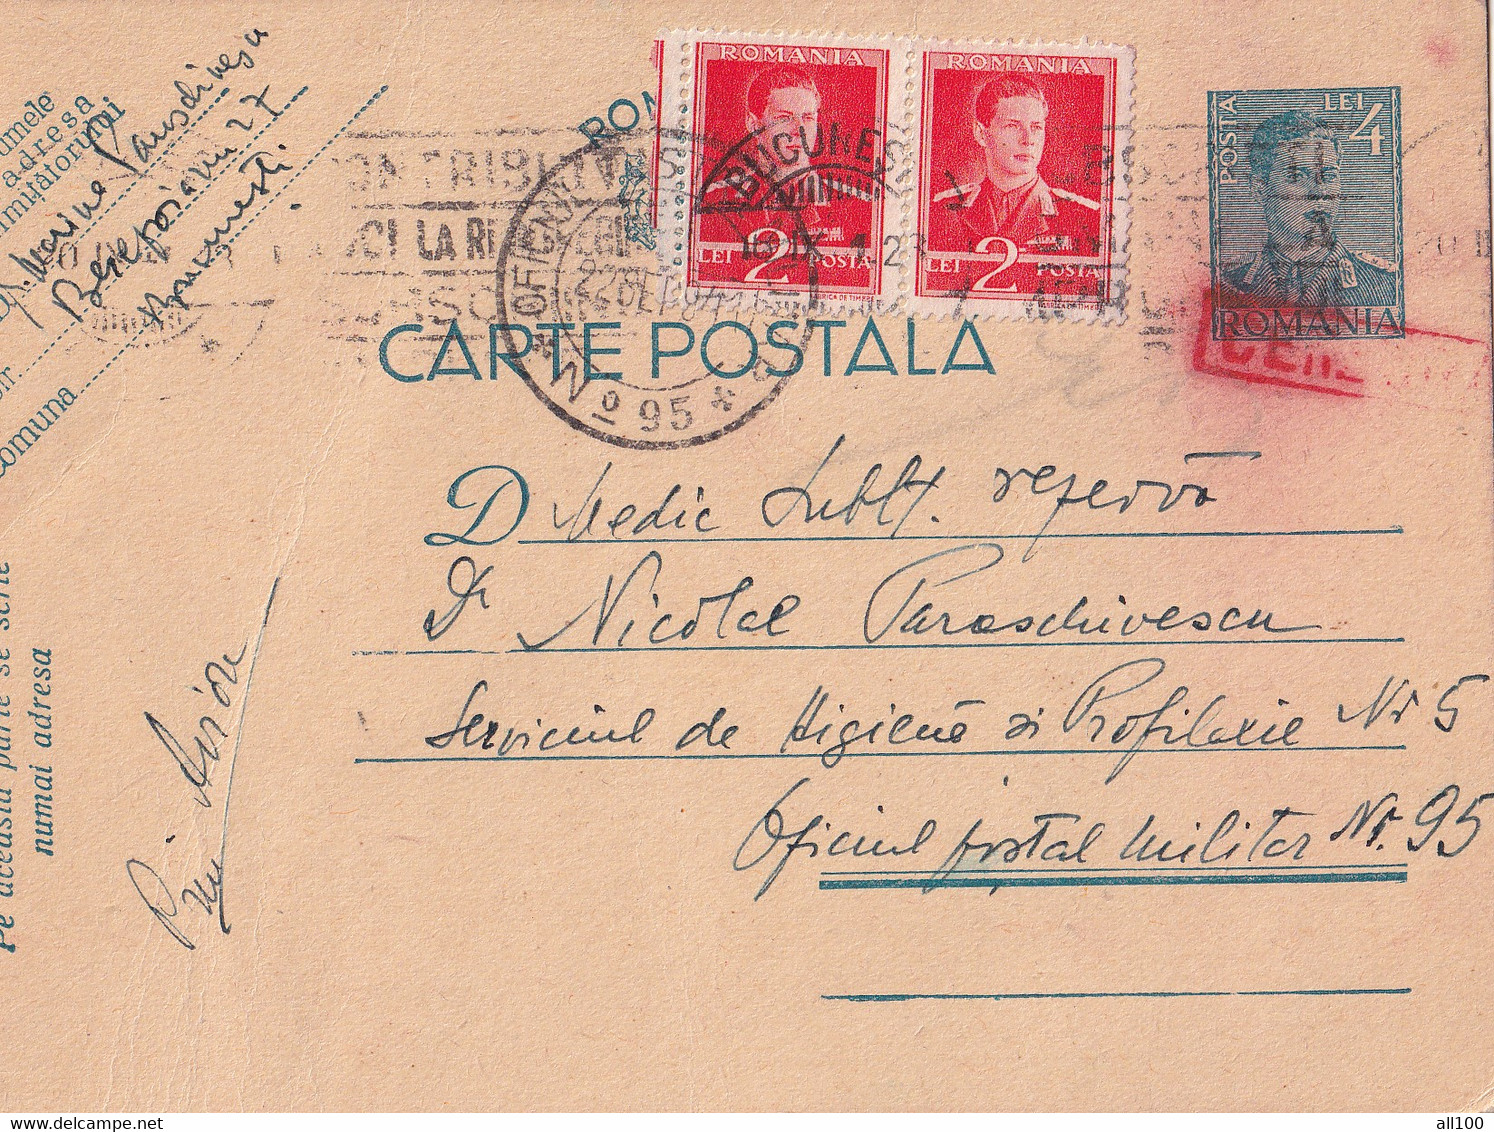 A16438 - MILITARY LETTER POSTAL STATIONERY KING MICHAEL 4 LEI CENZURAT USED 1942 OFICIUL MILITAR 95 - World War 2 Letters